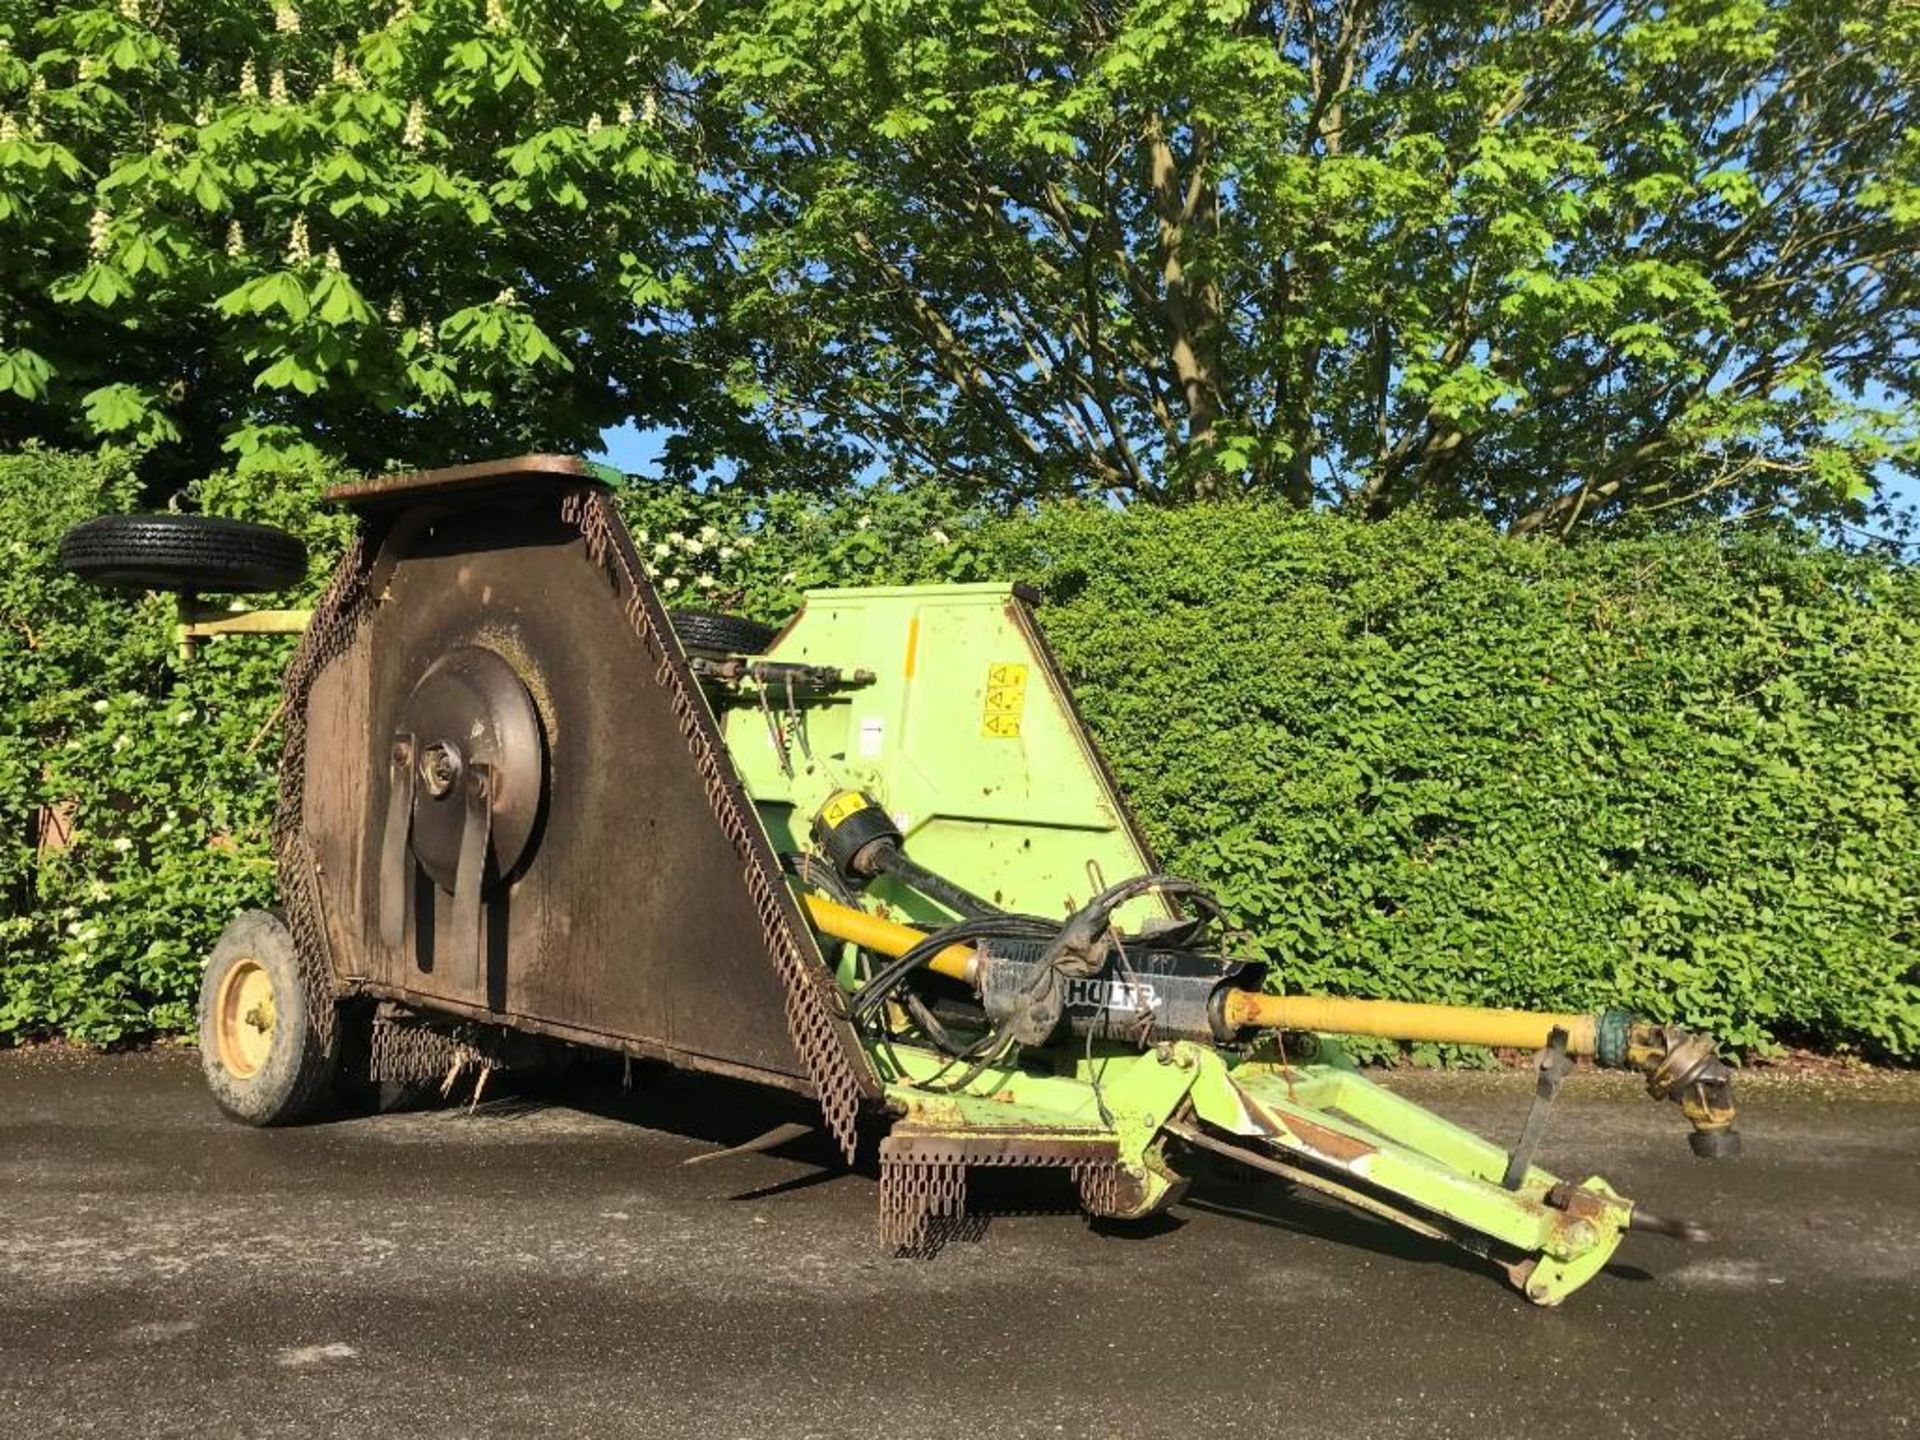 2006 Twose Schulte S150 batwing mower